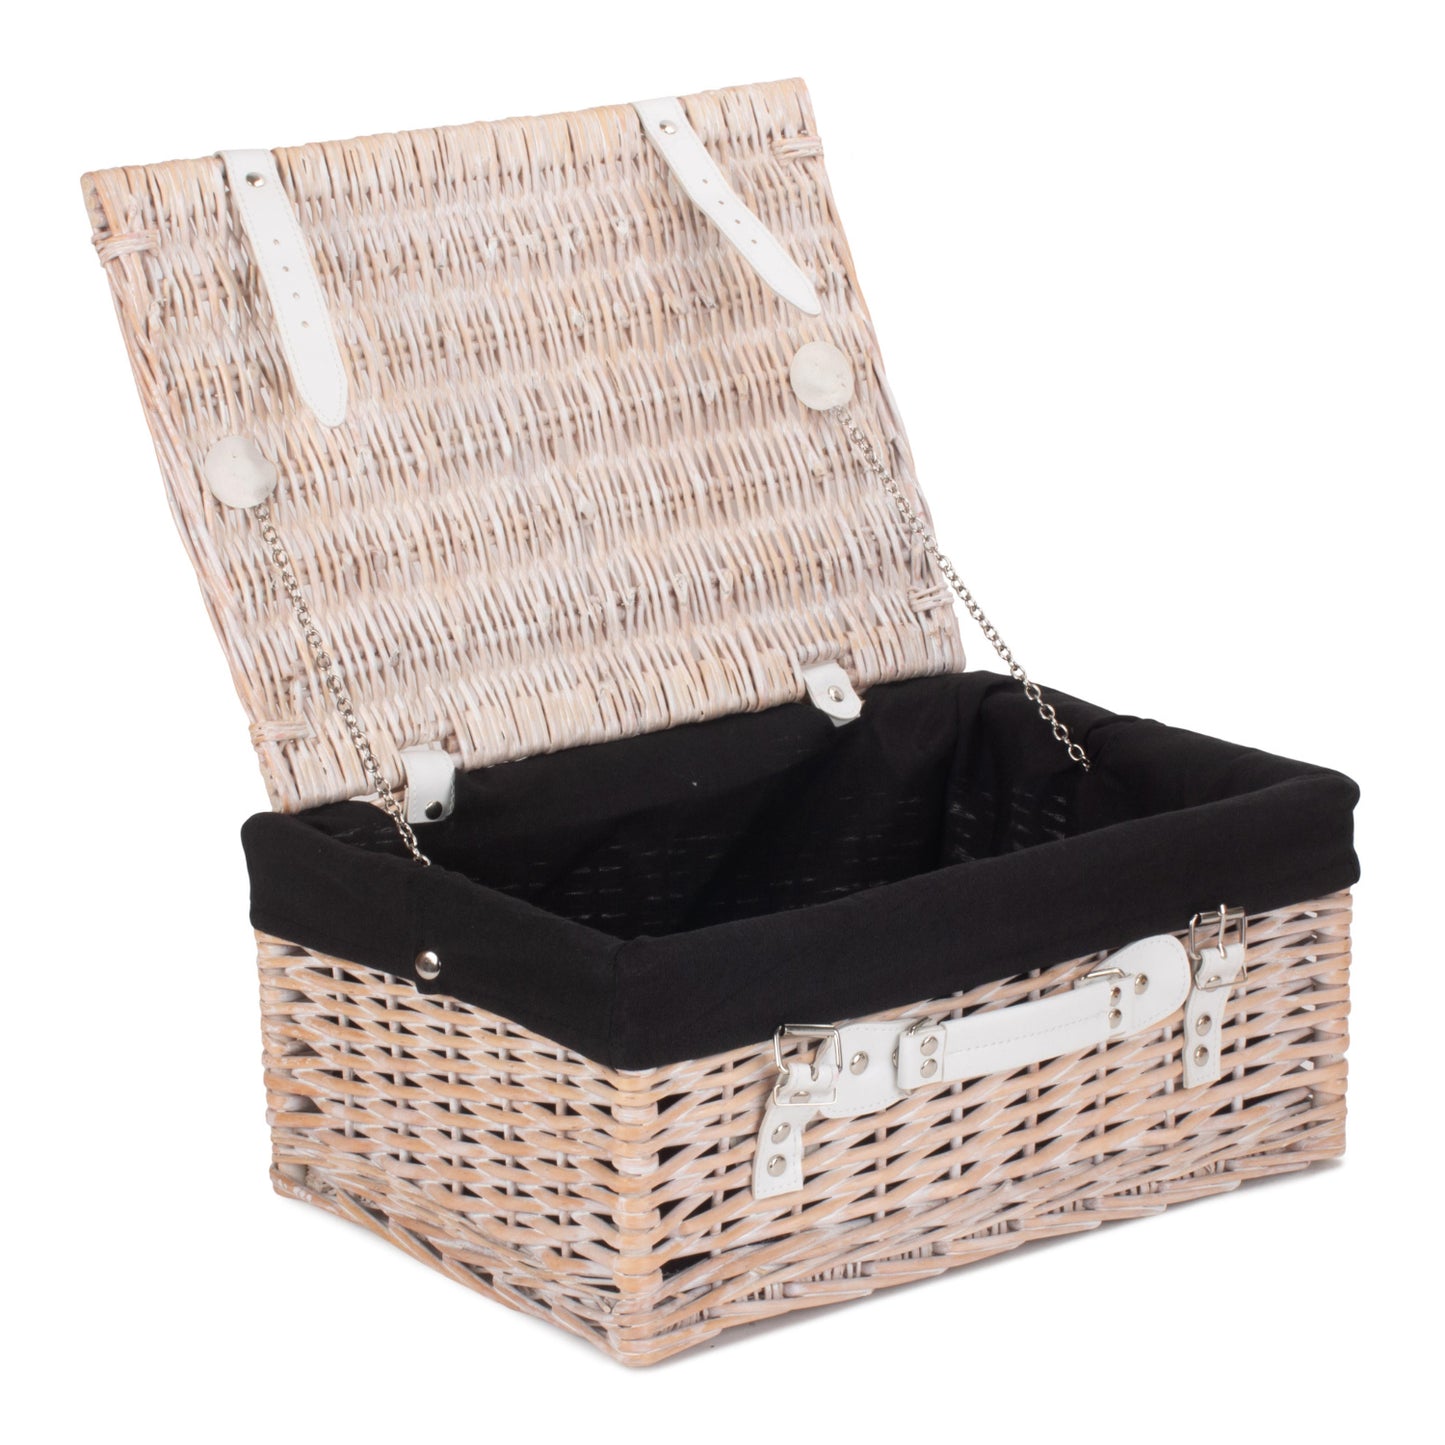 16 Inch White Hamper With Black Lining